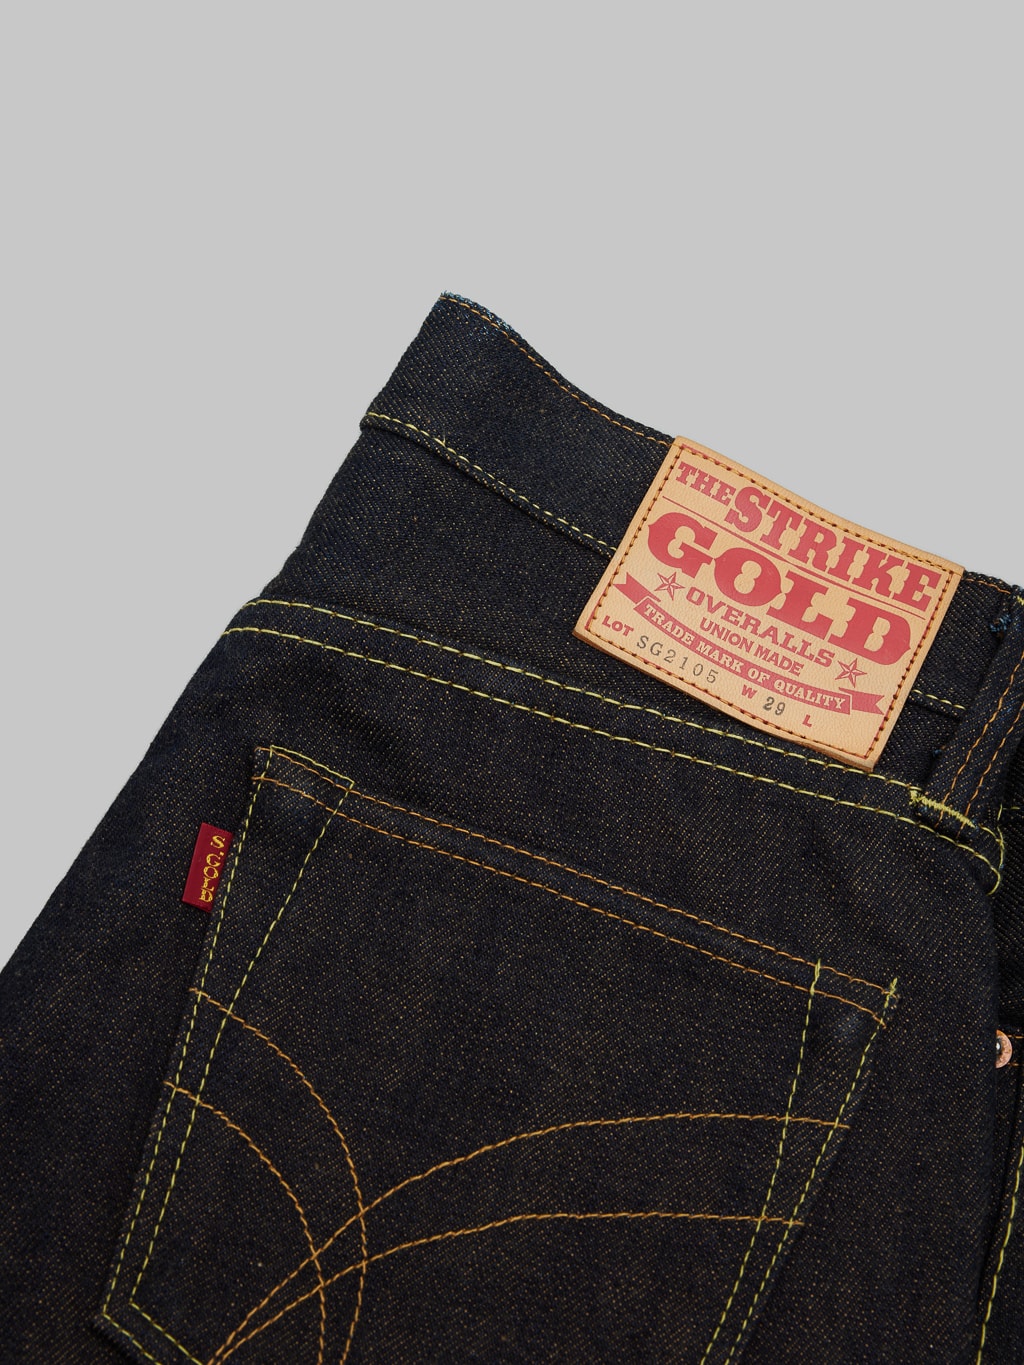 The Strike Gold Brown Weft Slim Jeans brand leather patch